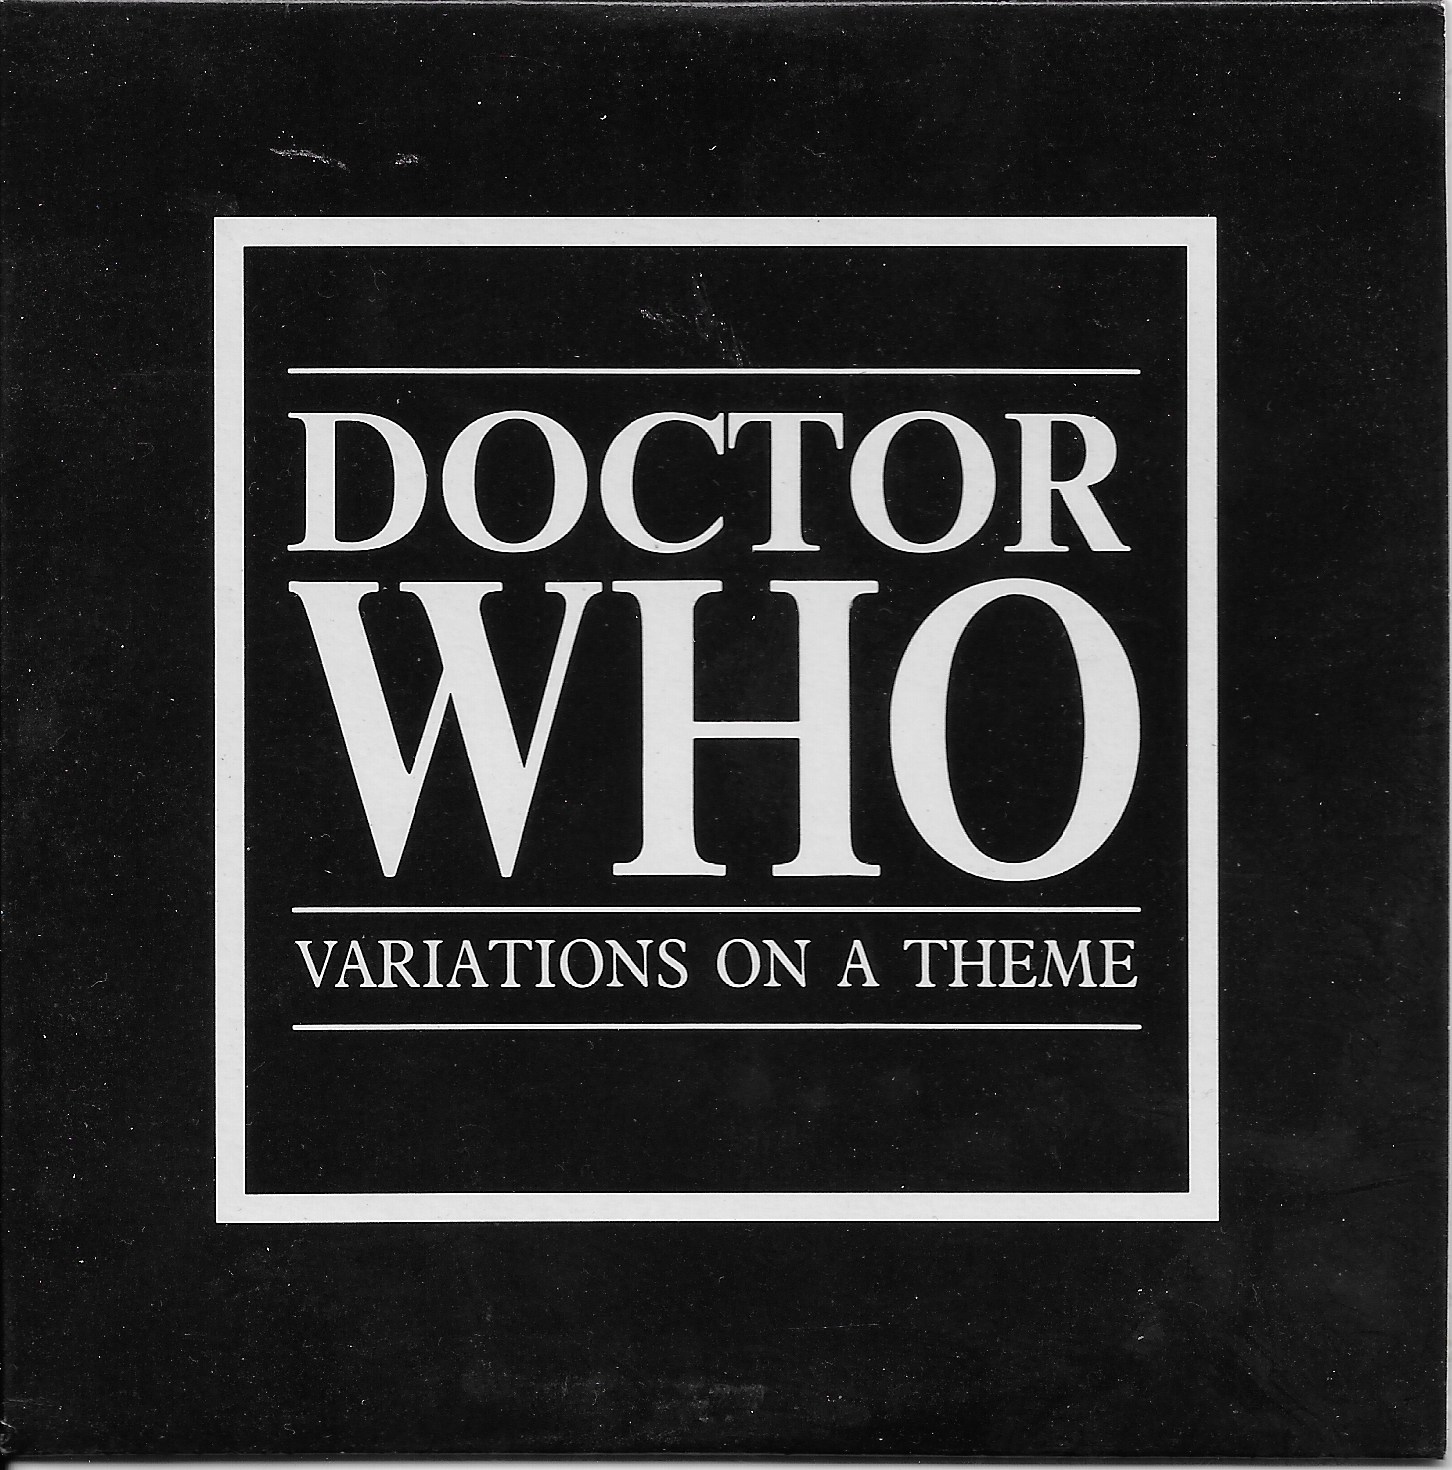 Picture of Doctor Who - Variations on a theme by artist Ron Grainer from the BBC cdsingles - Records and Tapes library